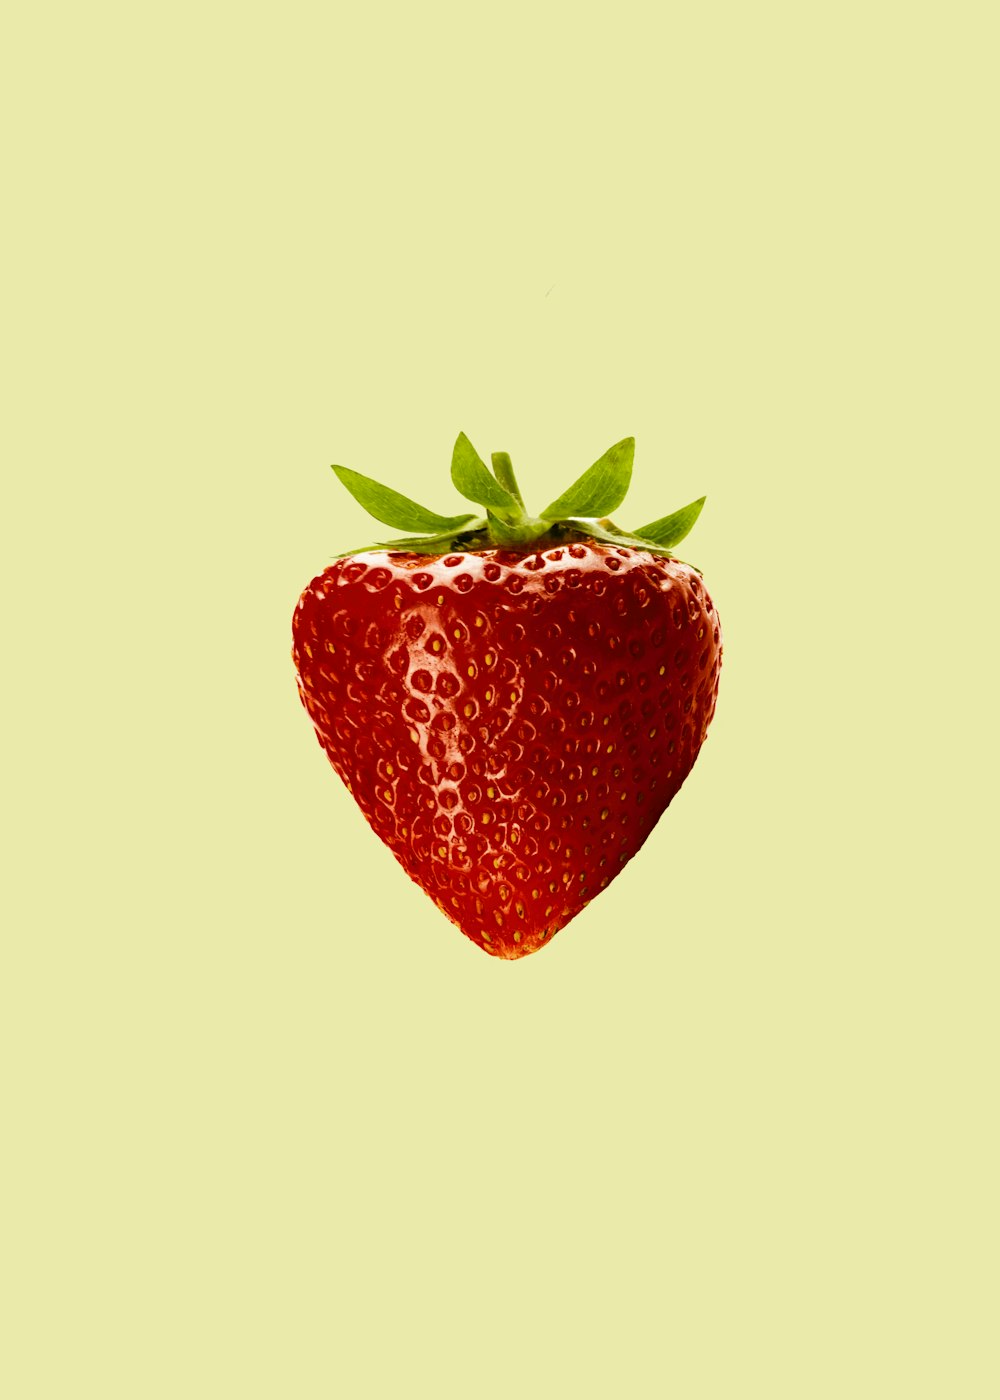 red strawberry fruit with white background